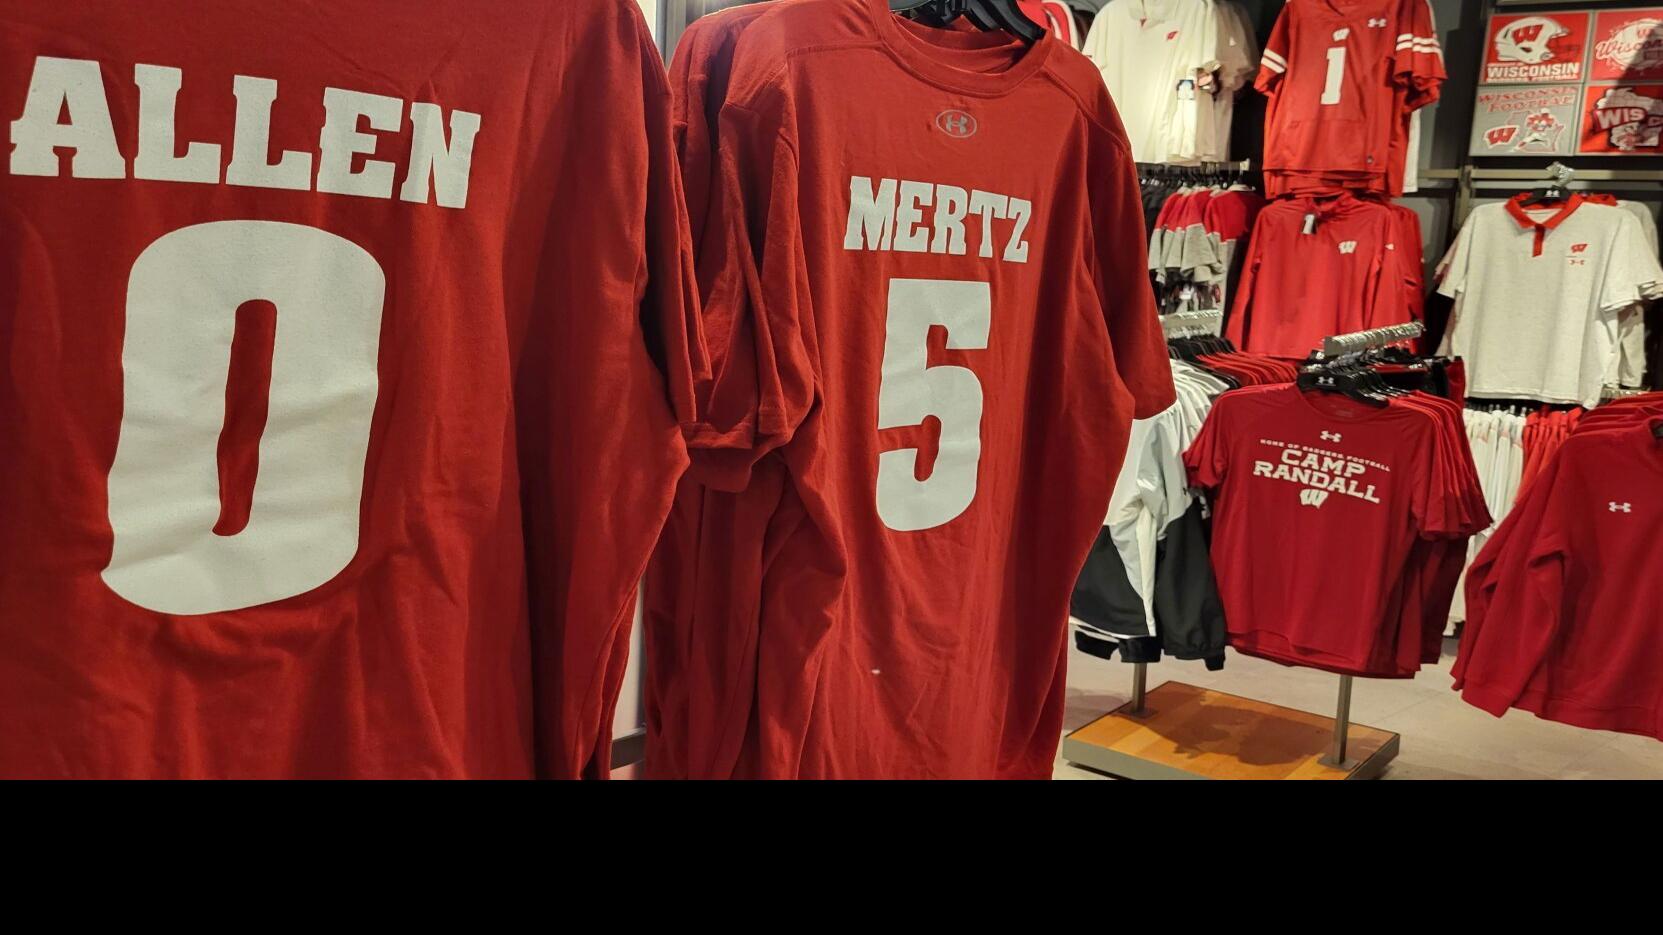 Player names arrive on Wisconsin T-shirts, and jerseys are coming soon